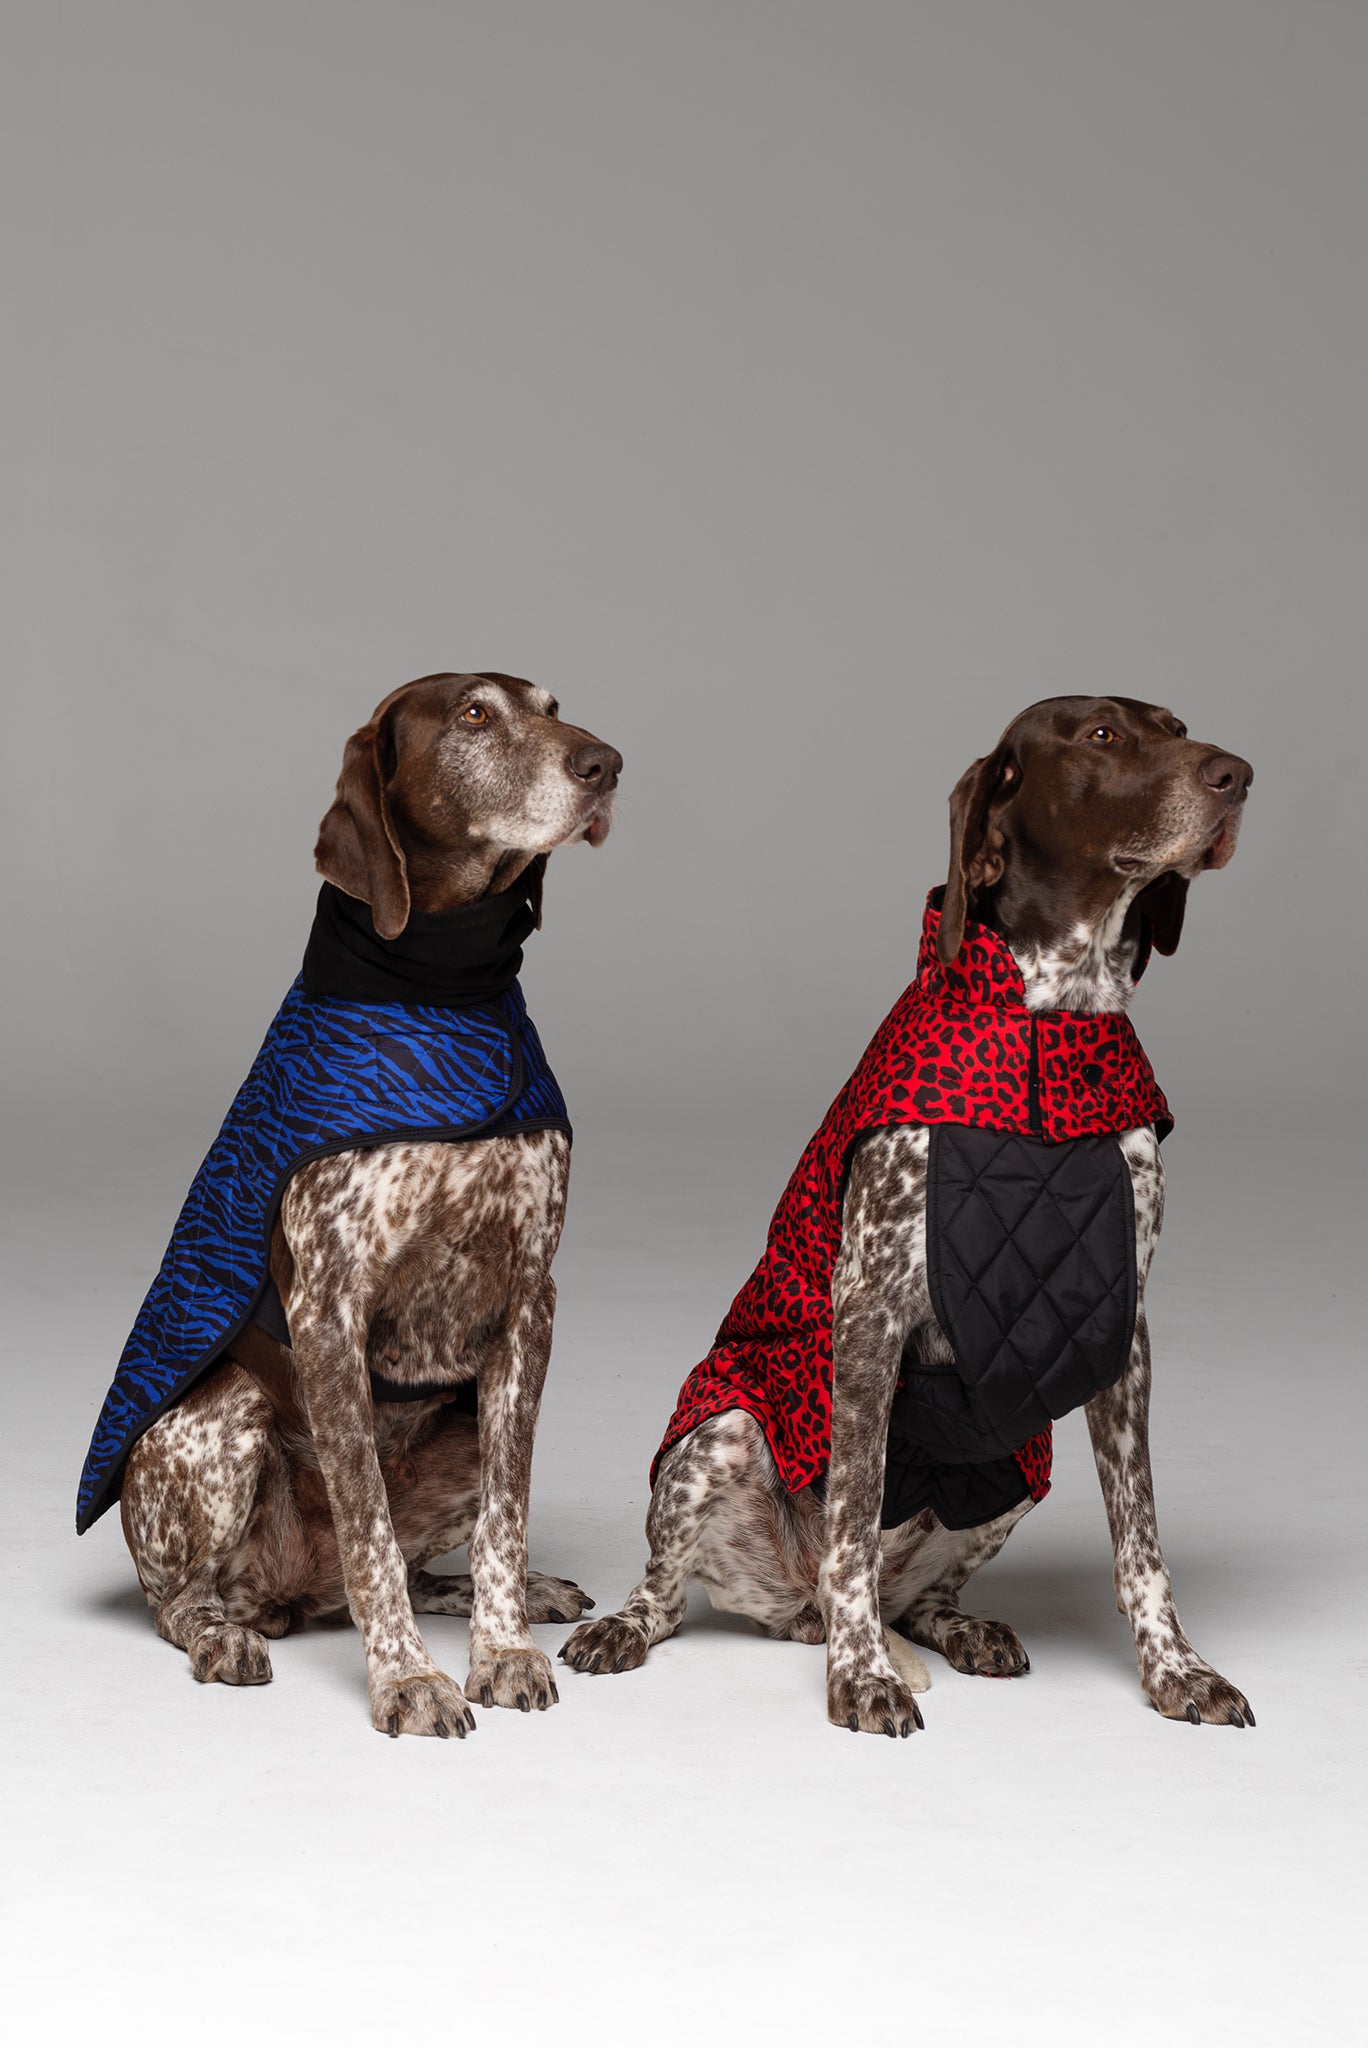 Two Superheros! Dog on left hand side in Liberbarkce Dog Coat in Blue Zebra and dog on right hand side in Animal Instinct Dog Jacket in Racy Red.